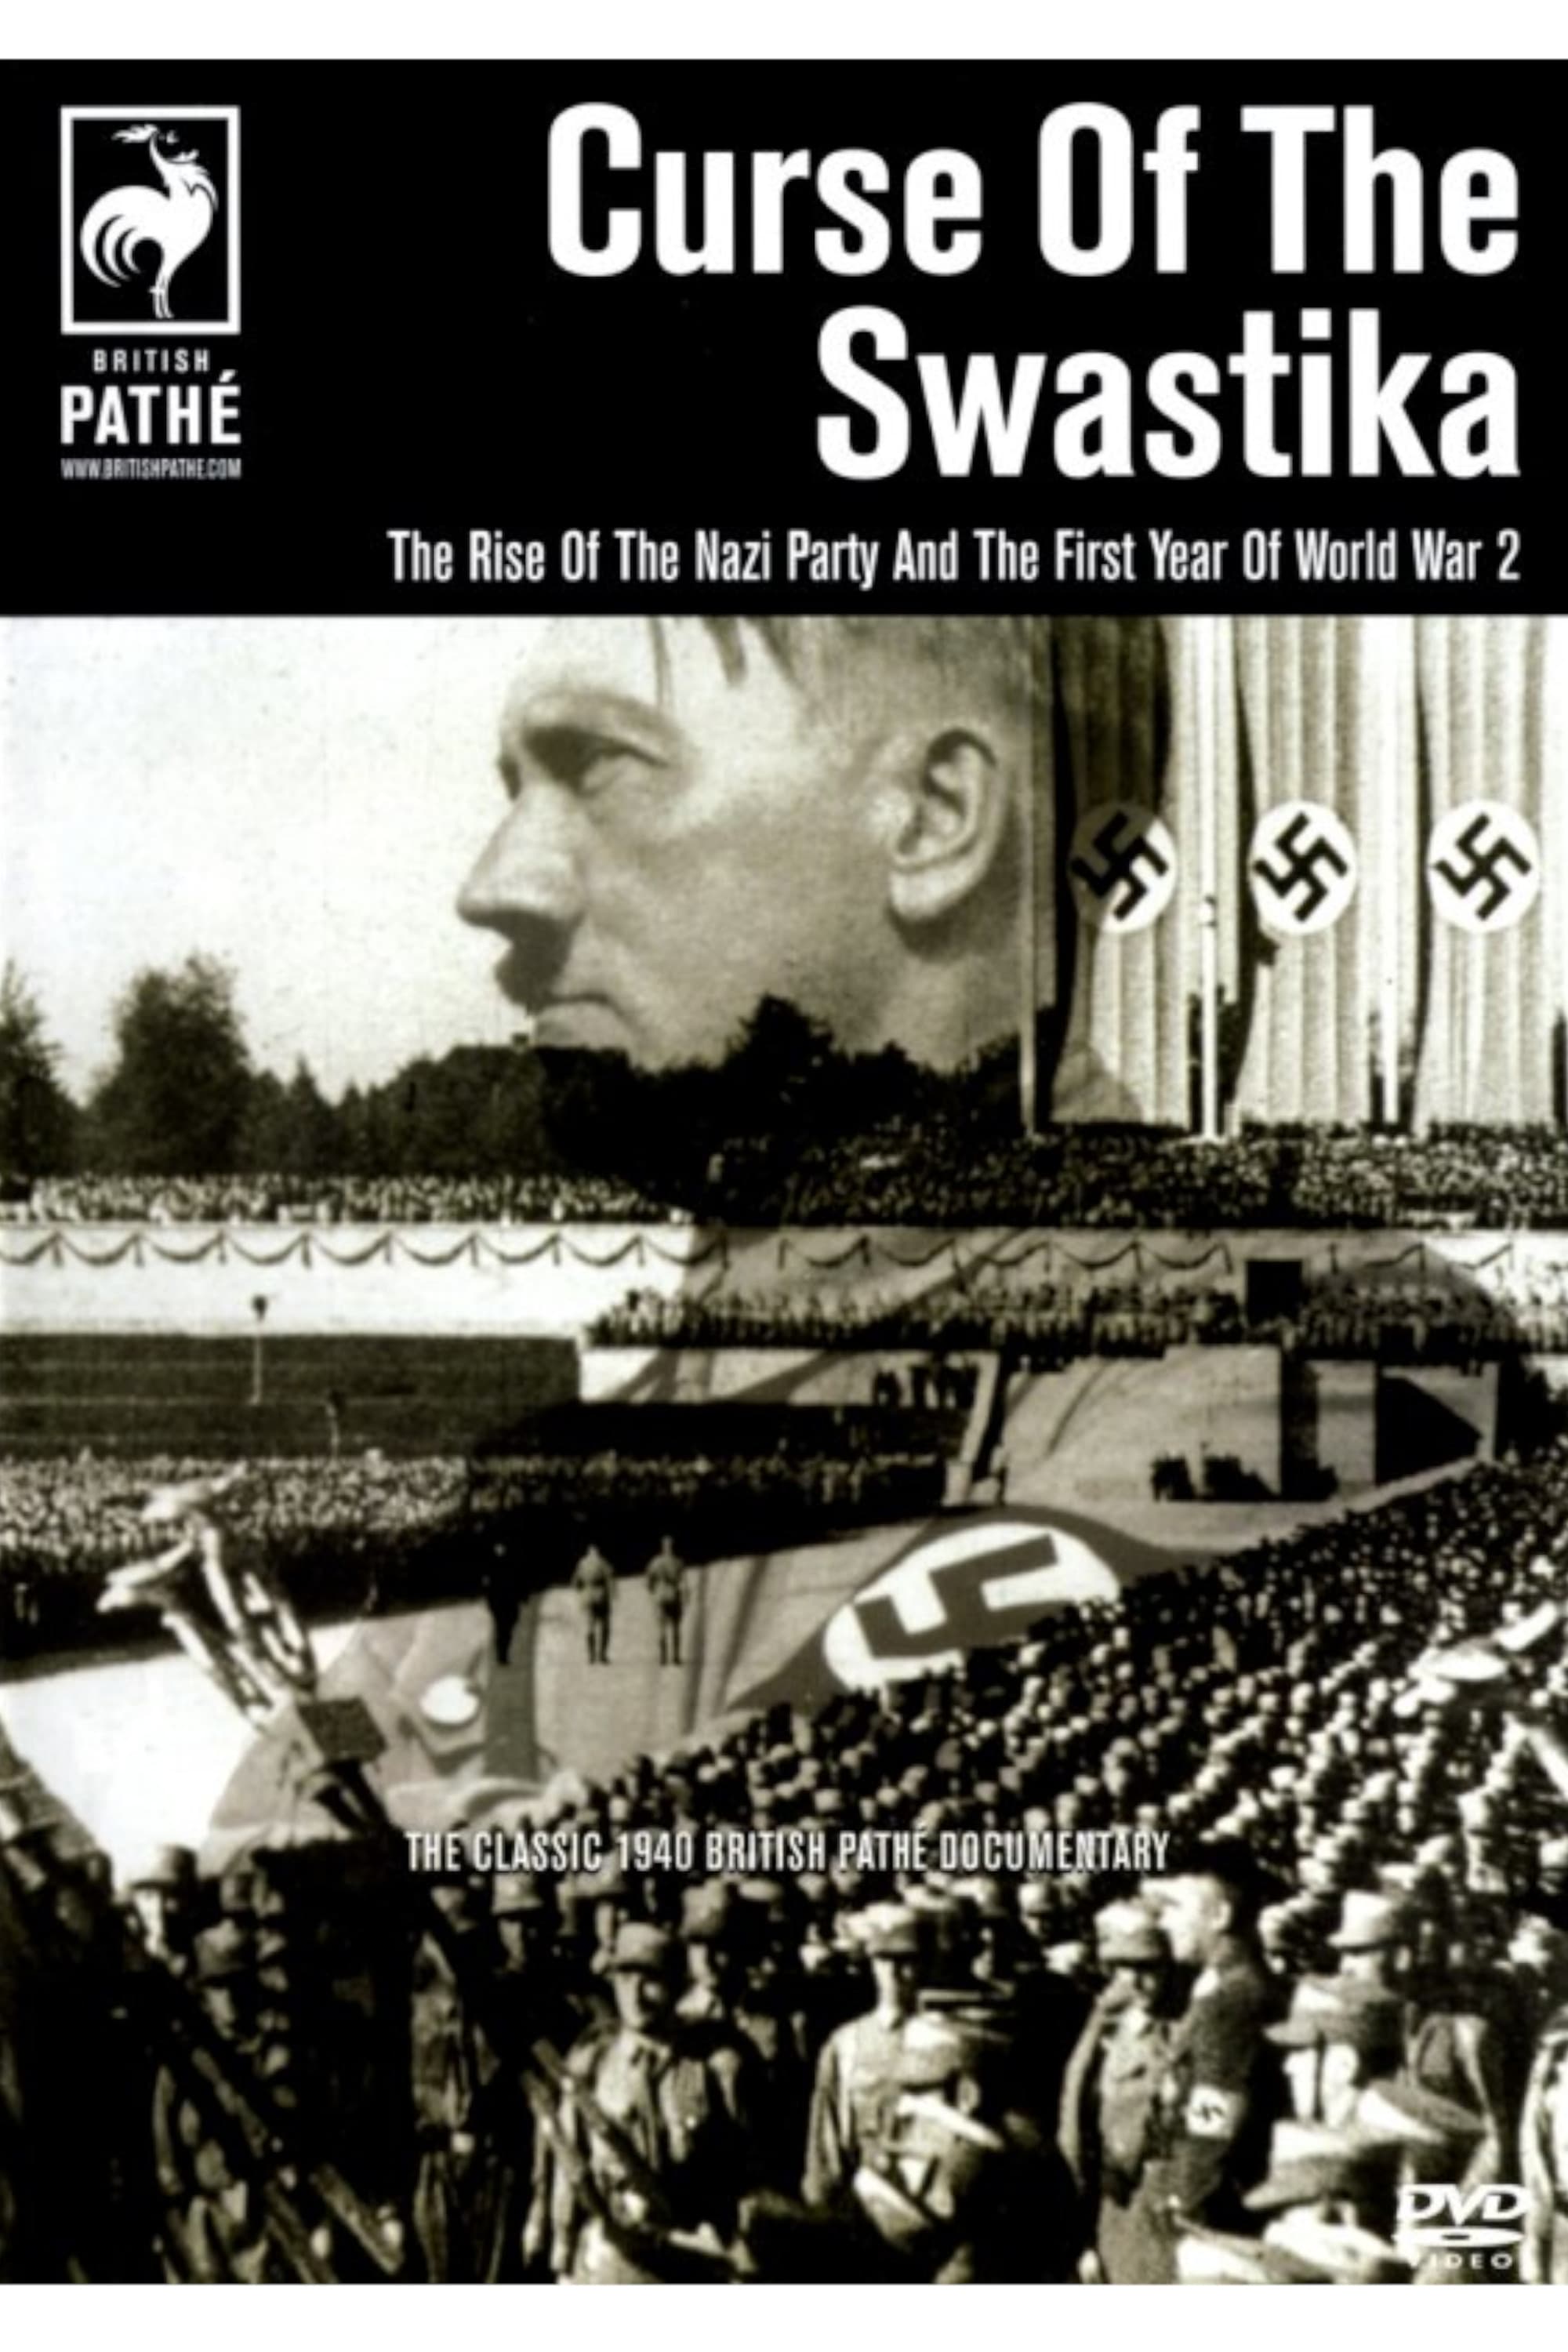 The Curse of the Swastika